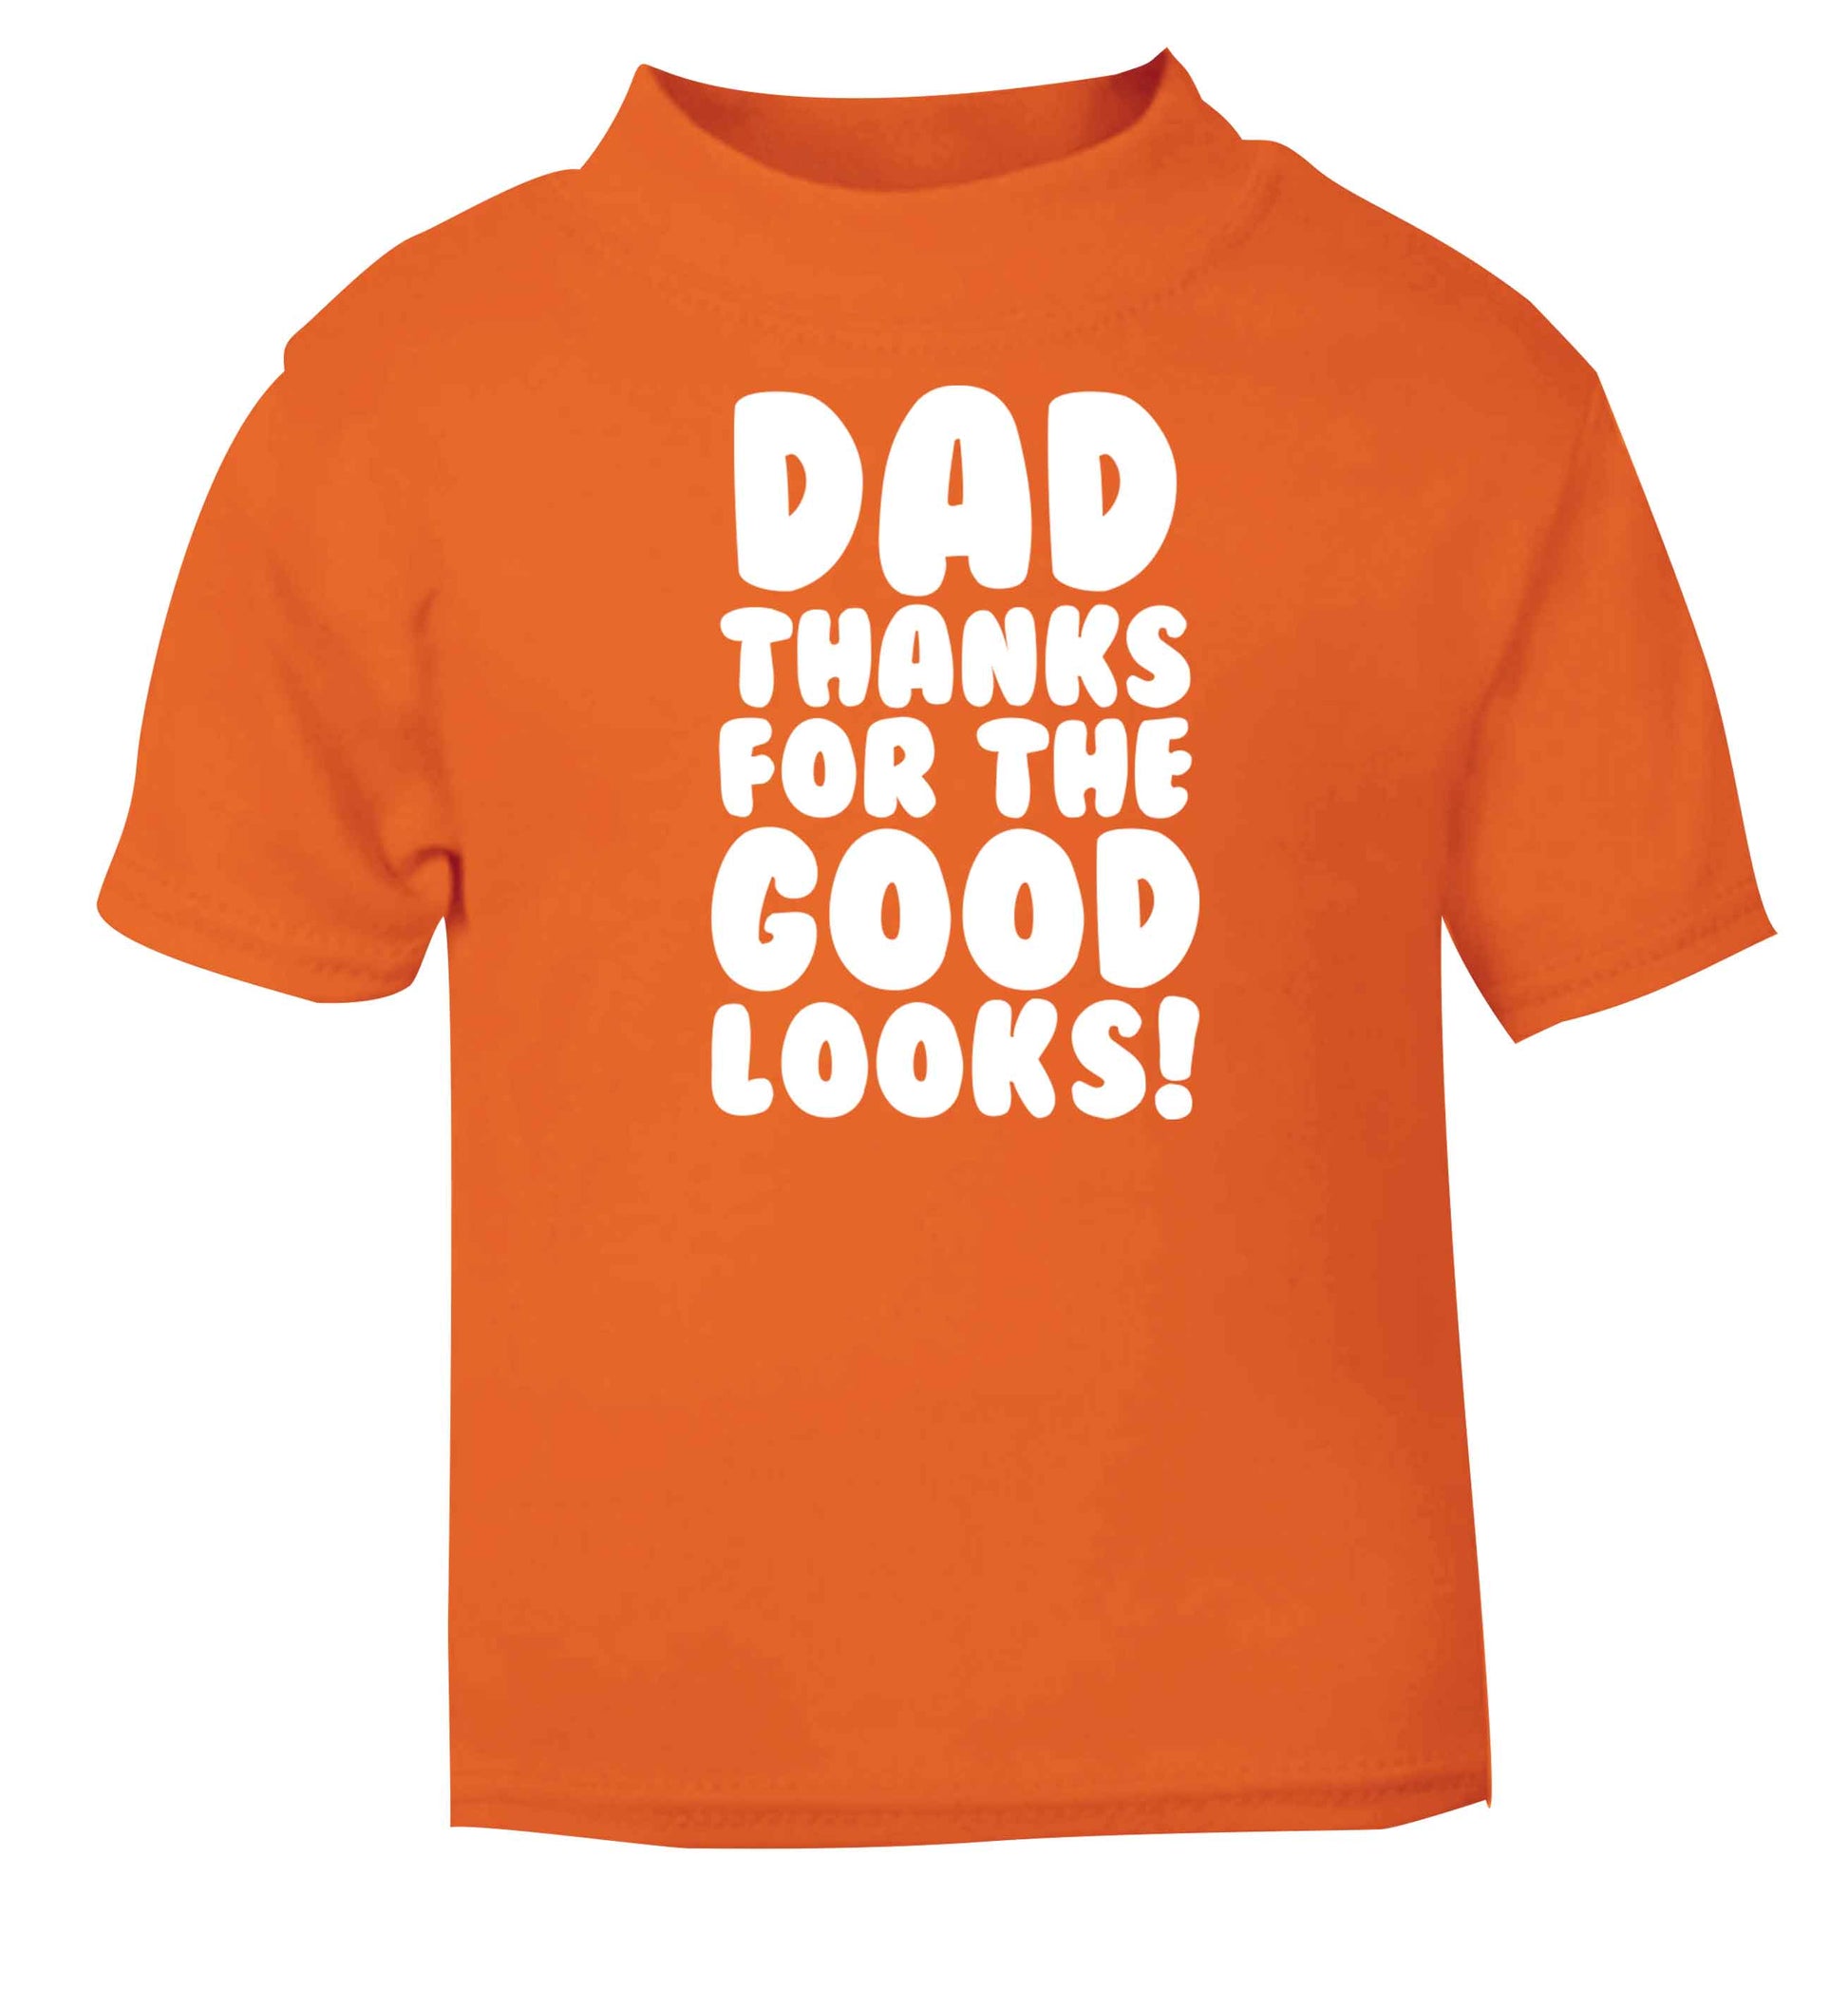 Dad thanks for the good looks orange baby toddler Tshirt 2 Years